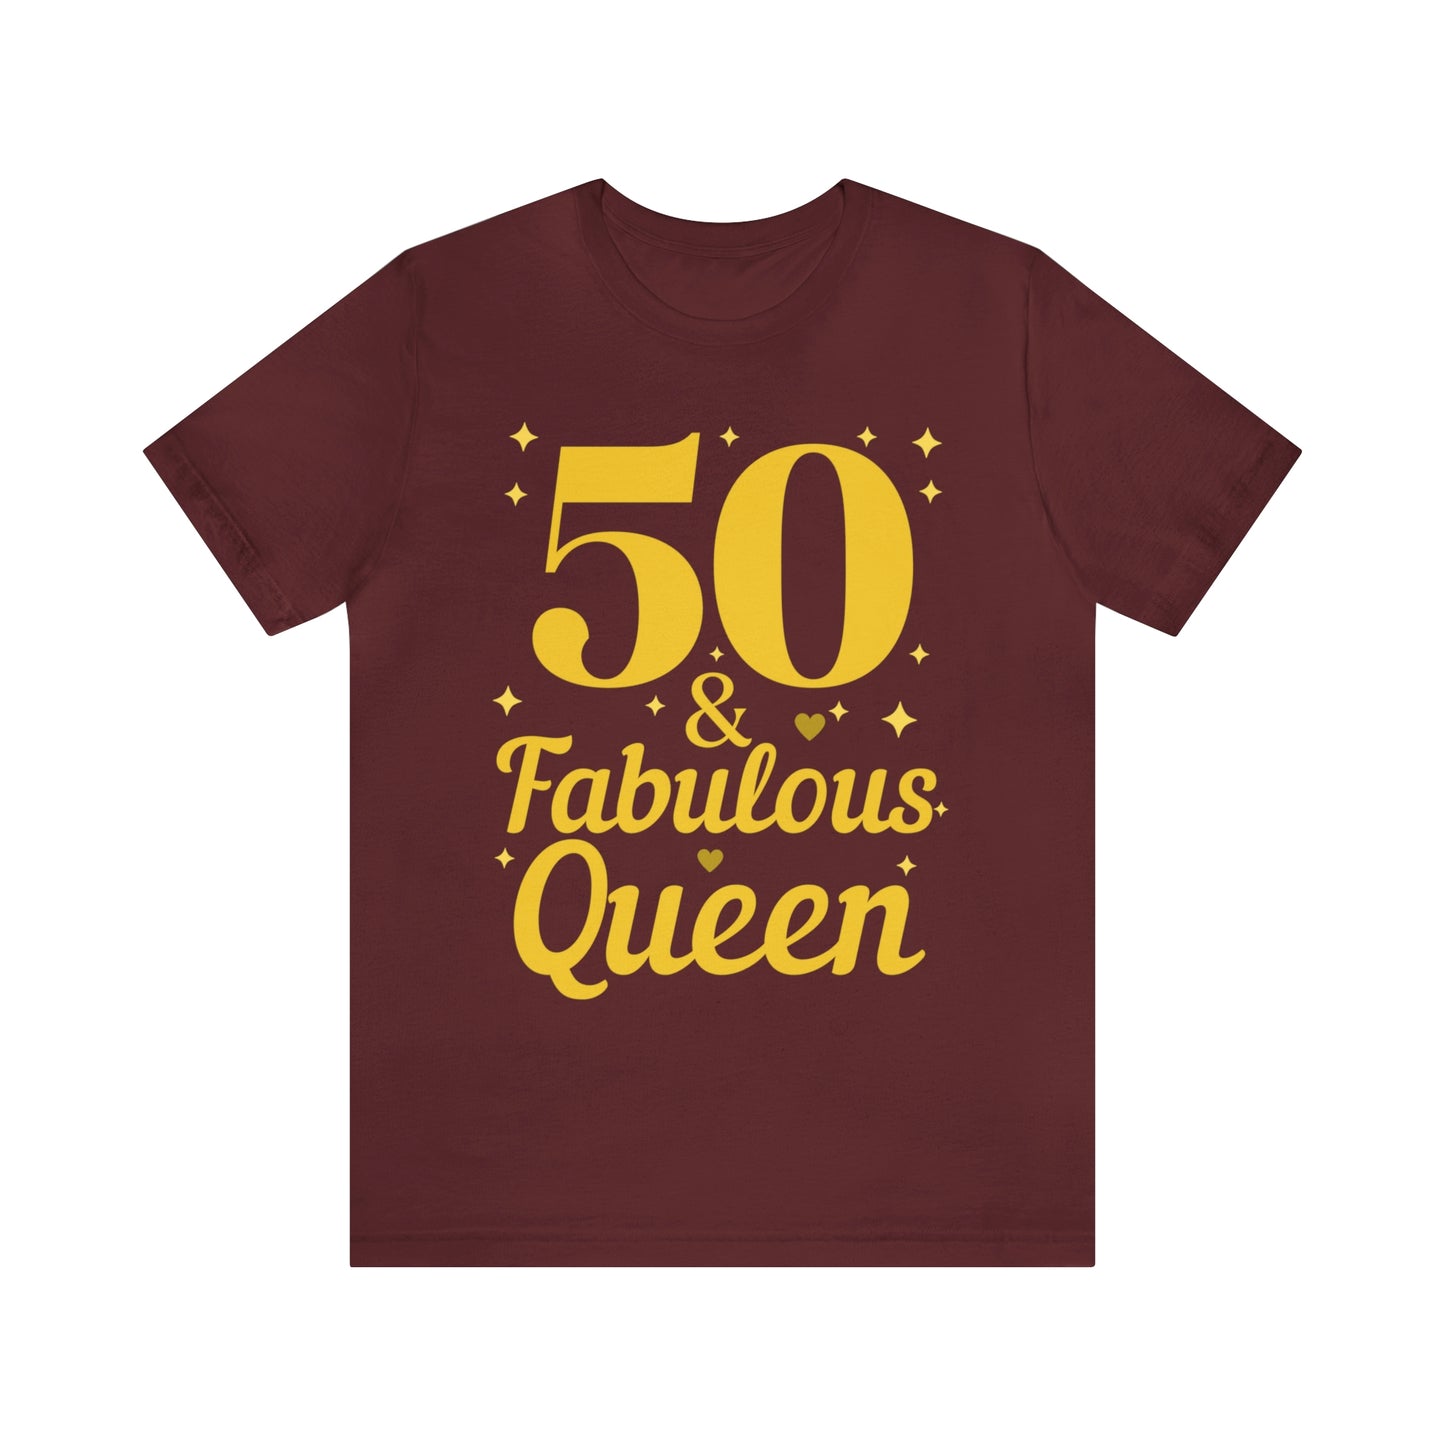 50 and Fabulous Queen shirt, Funny 50th birthday shirt, 50th birthday Tshirt, birthday queen shirt, Gift for 50th birthday, Vintage shirt, birthday gift, birthday girl shirt, mom’s birthday gift